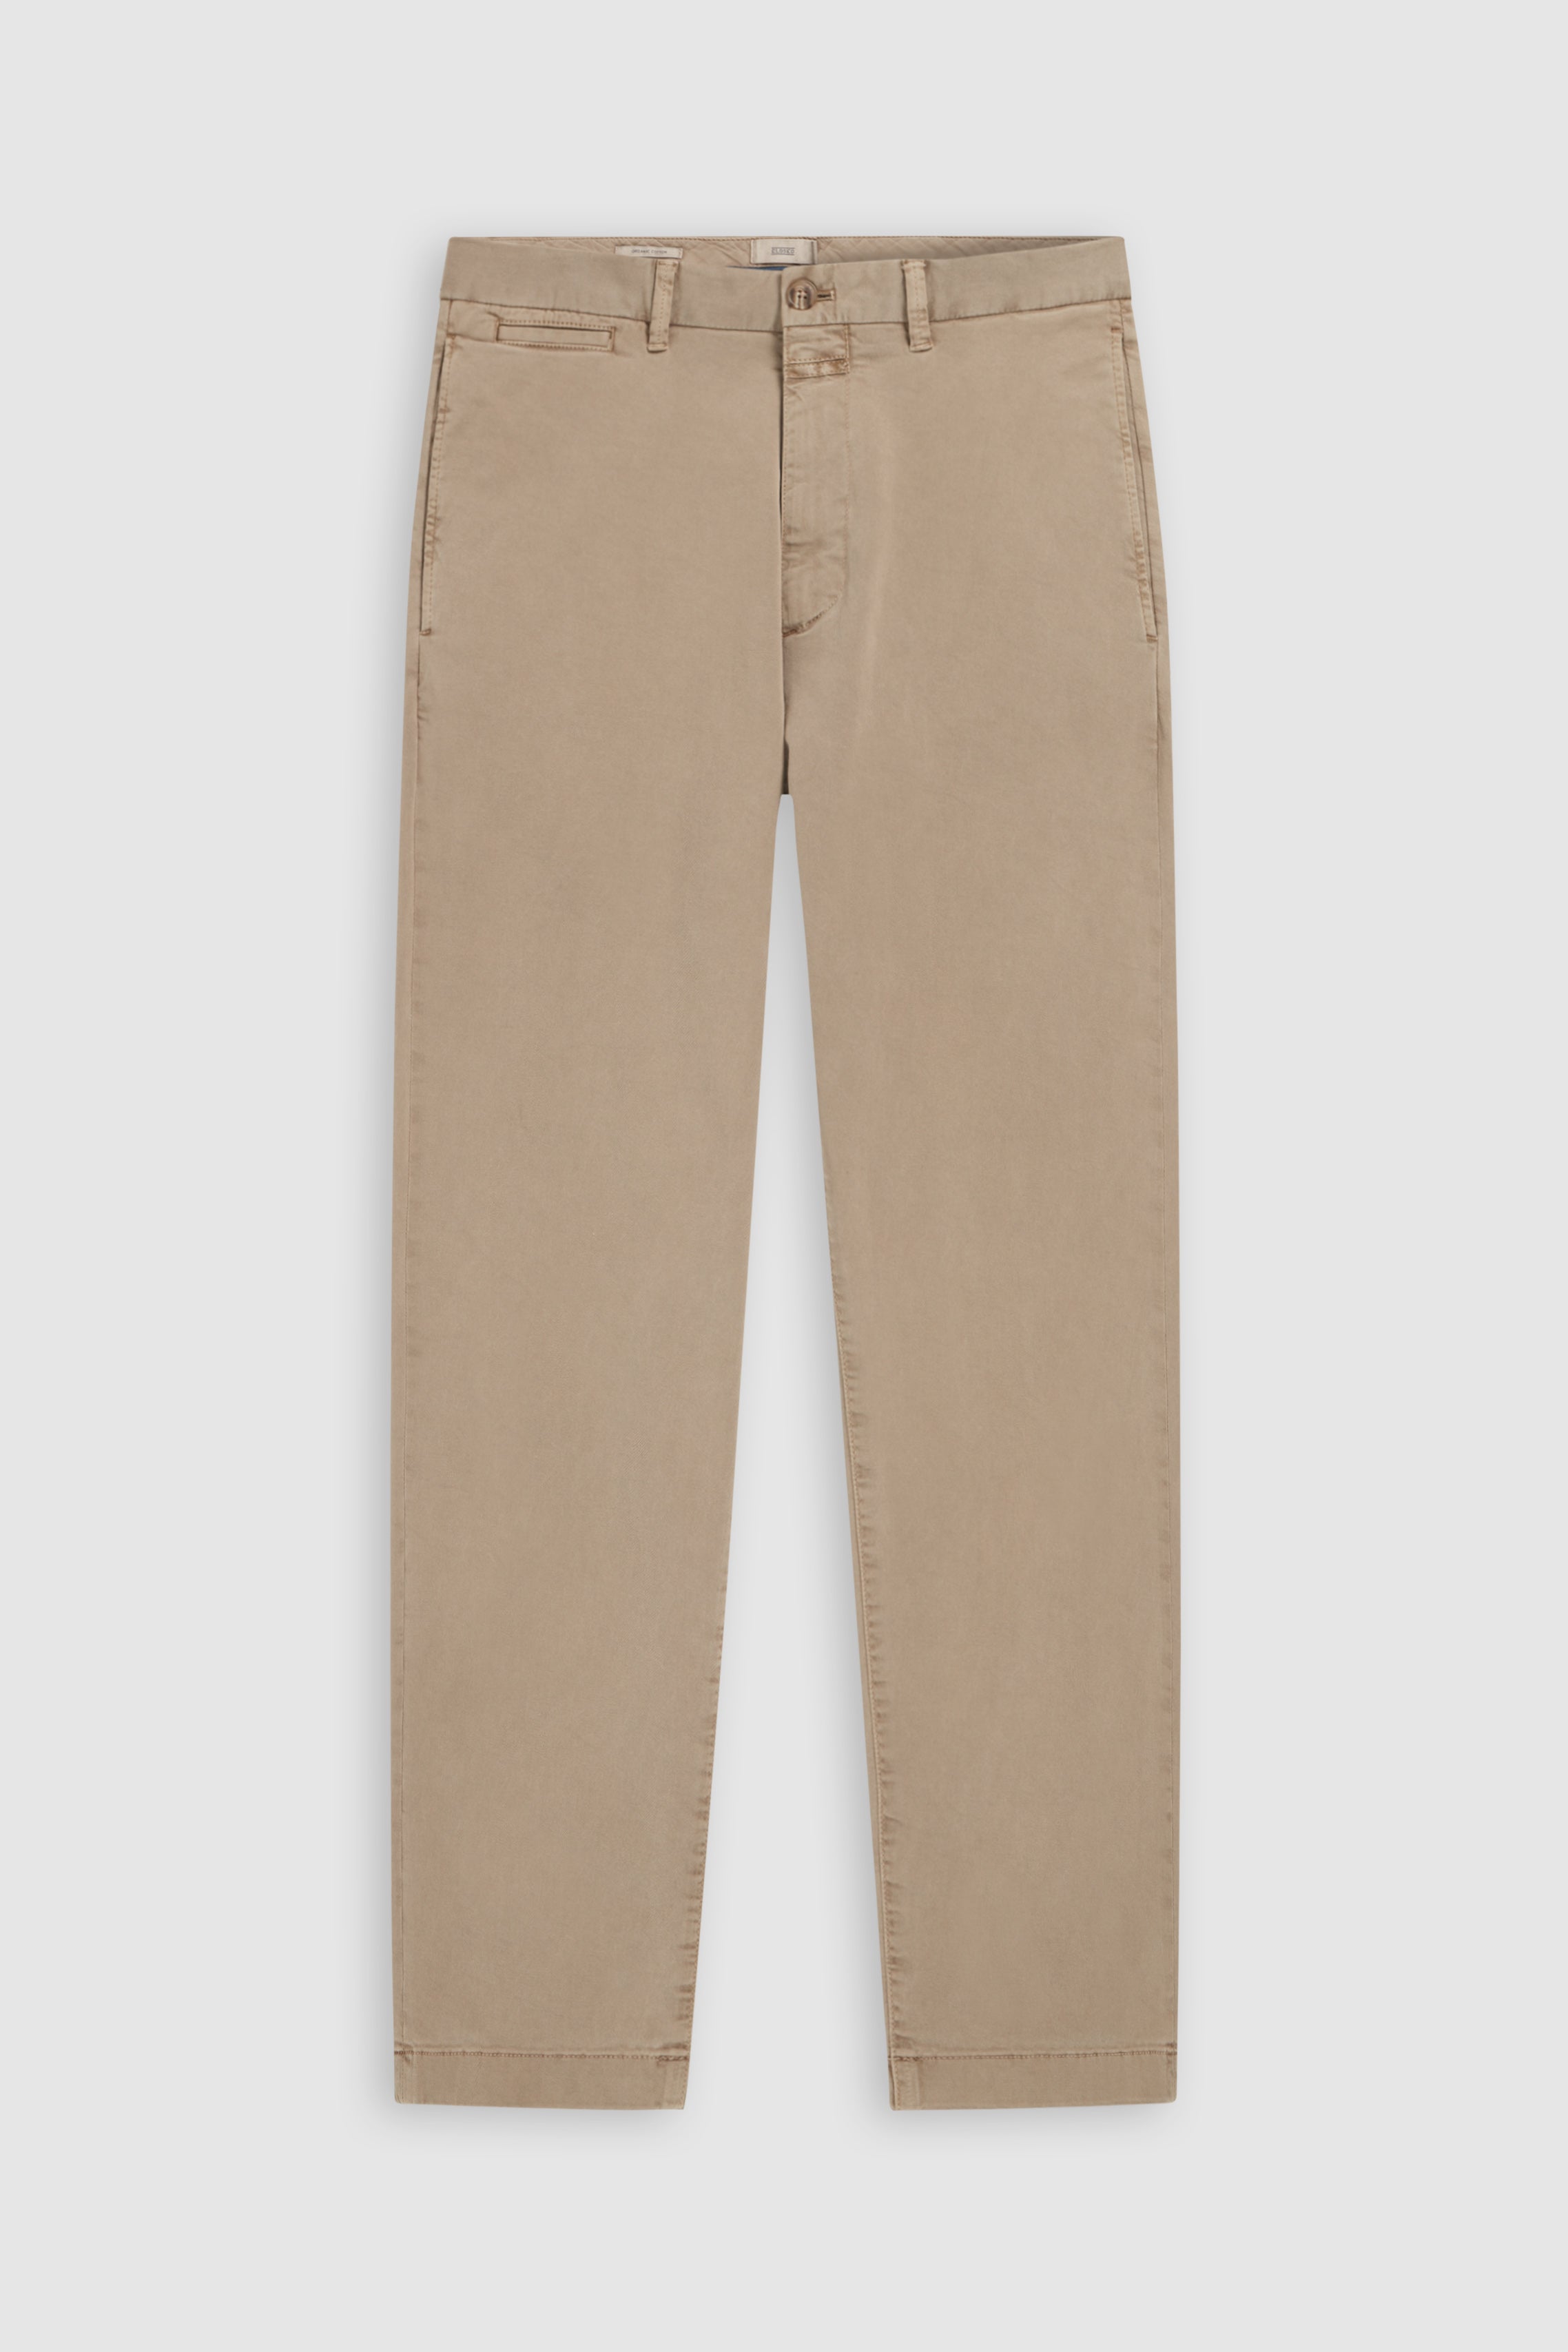 STYLE NAME TACOMA TAPERED PANTS